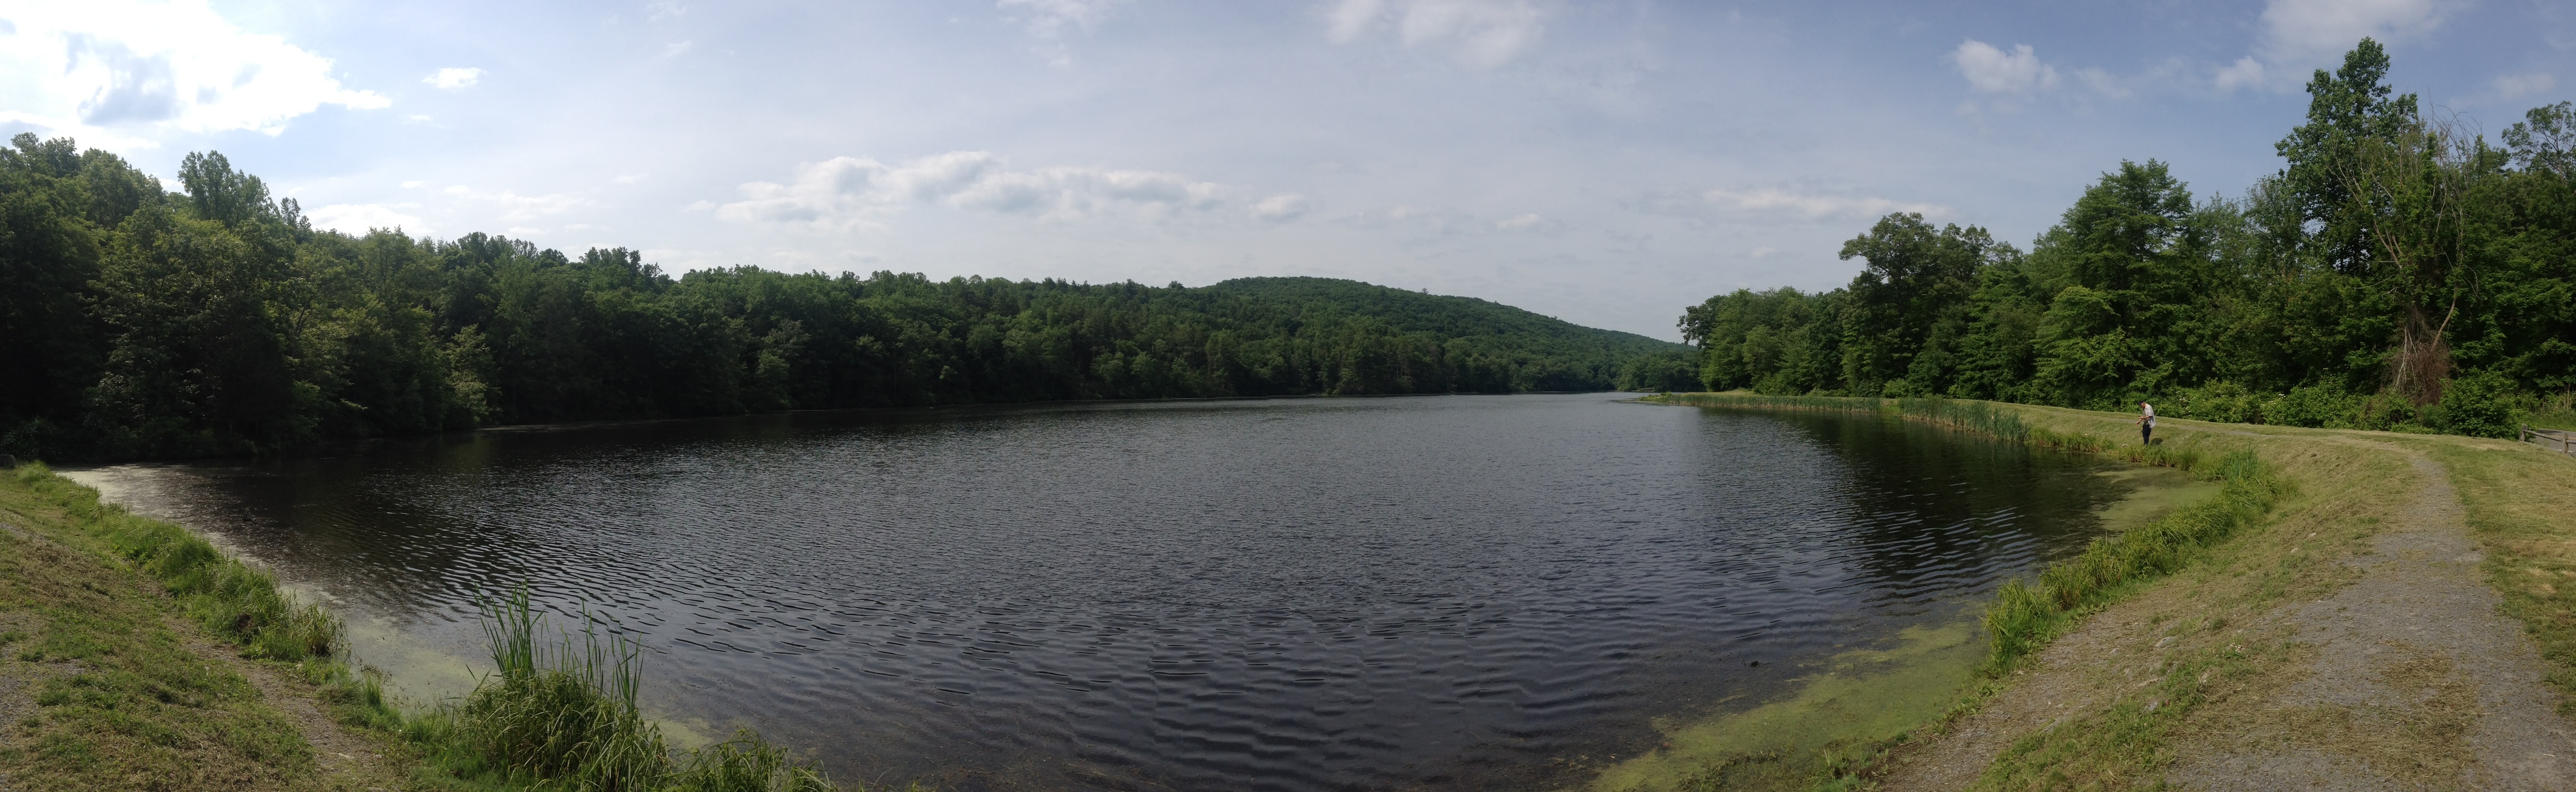 Hidden Lake in the Water Gap National Recreation Area